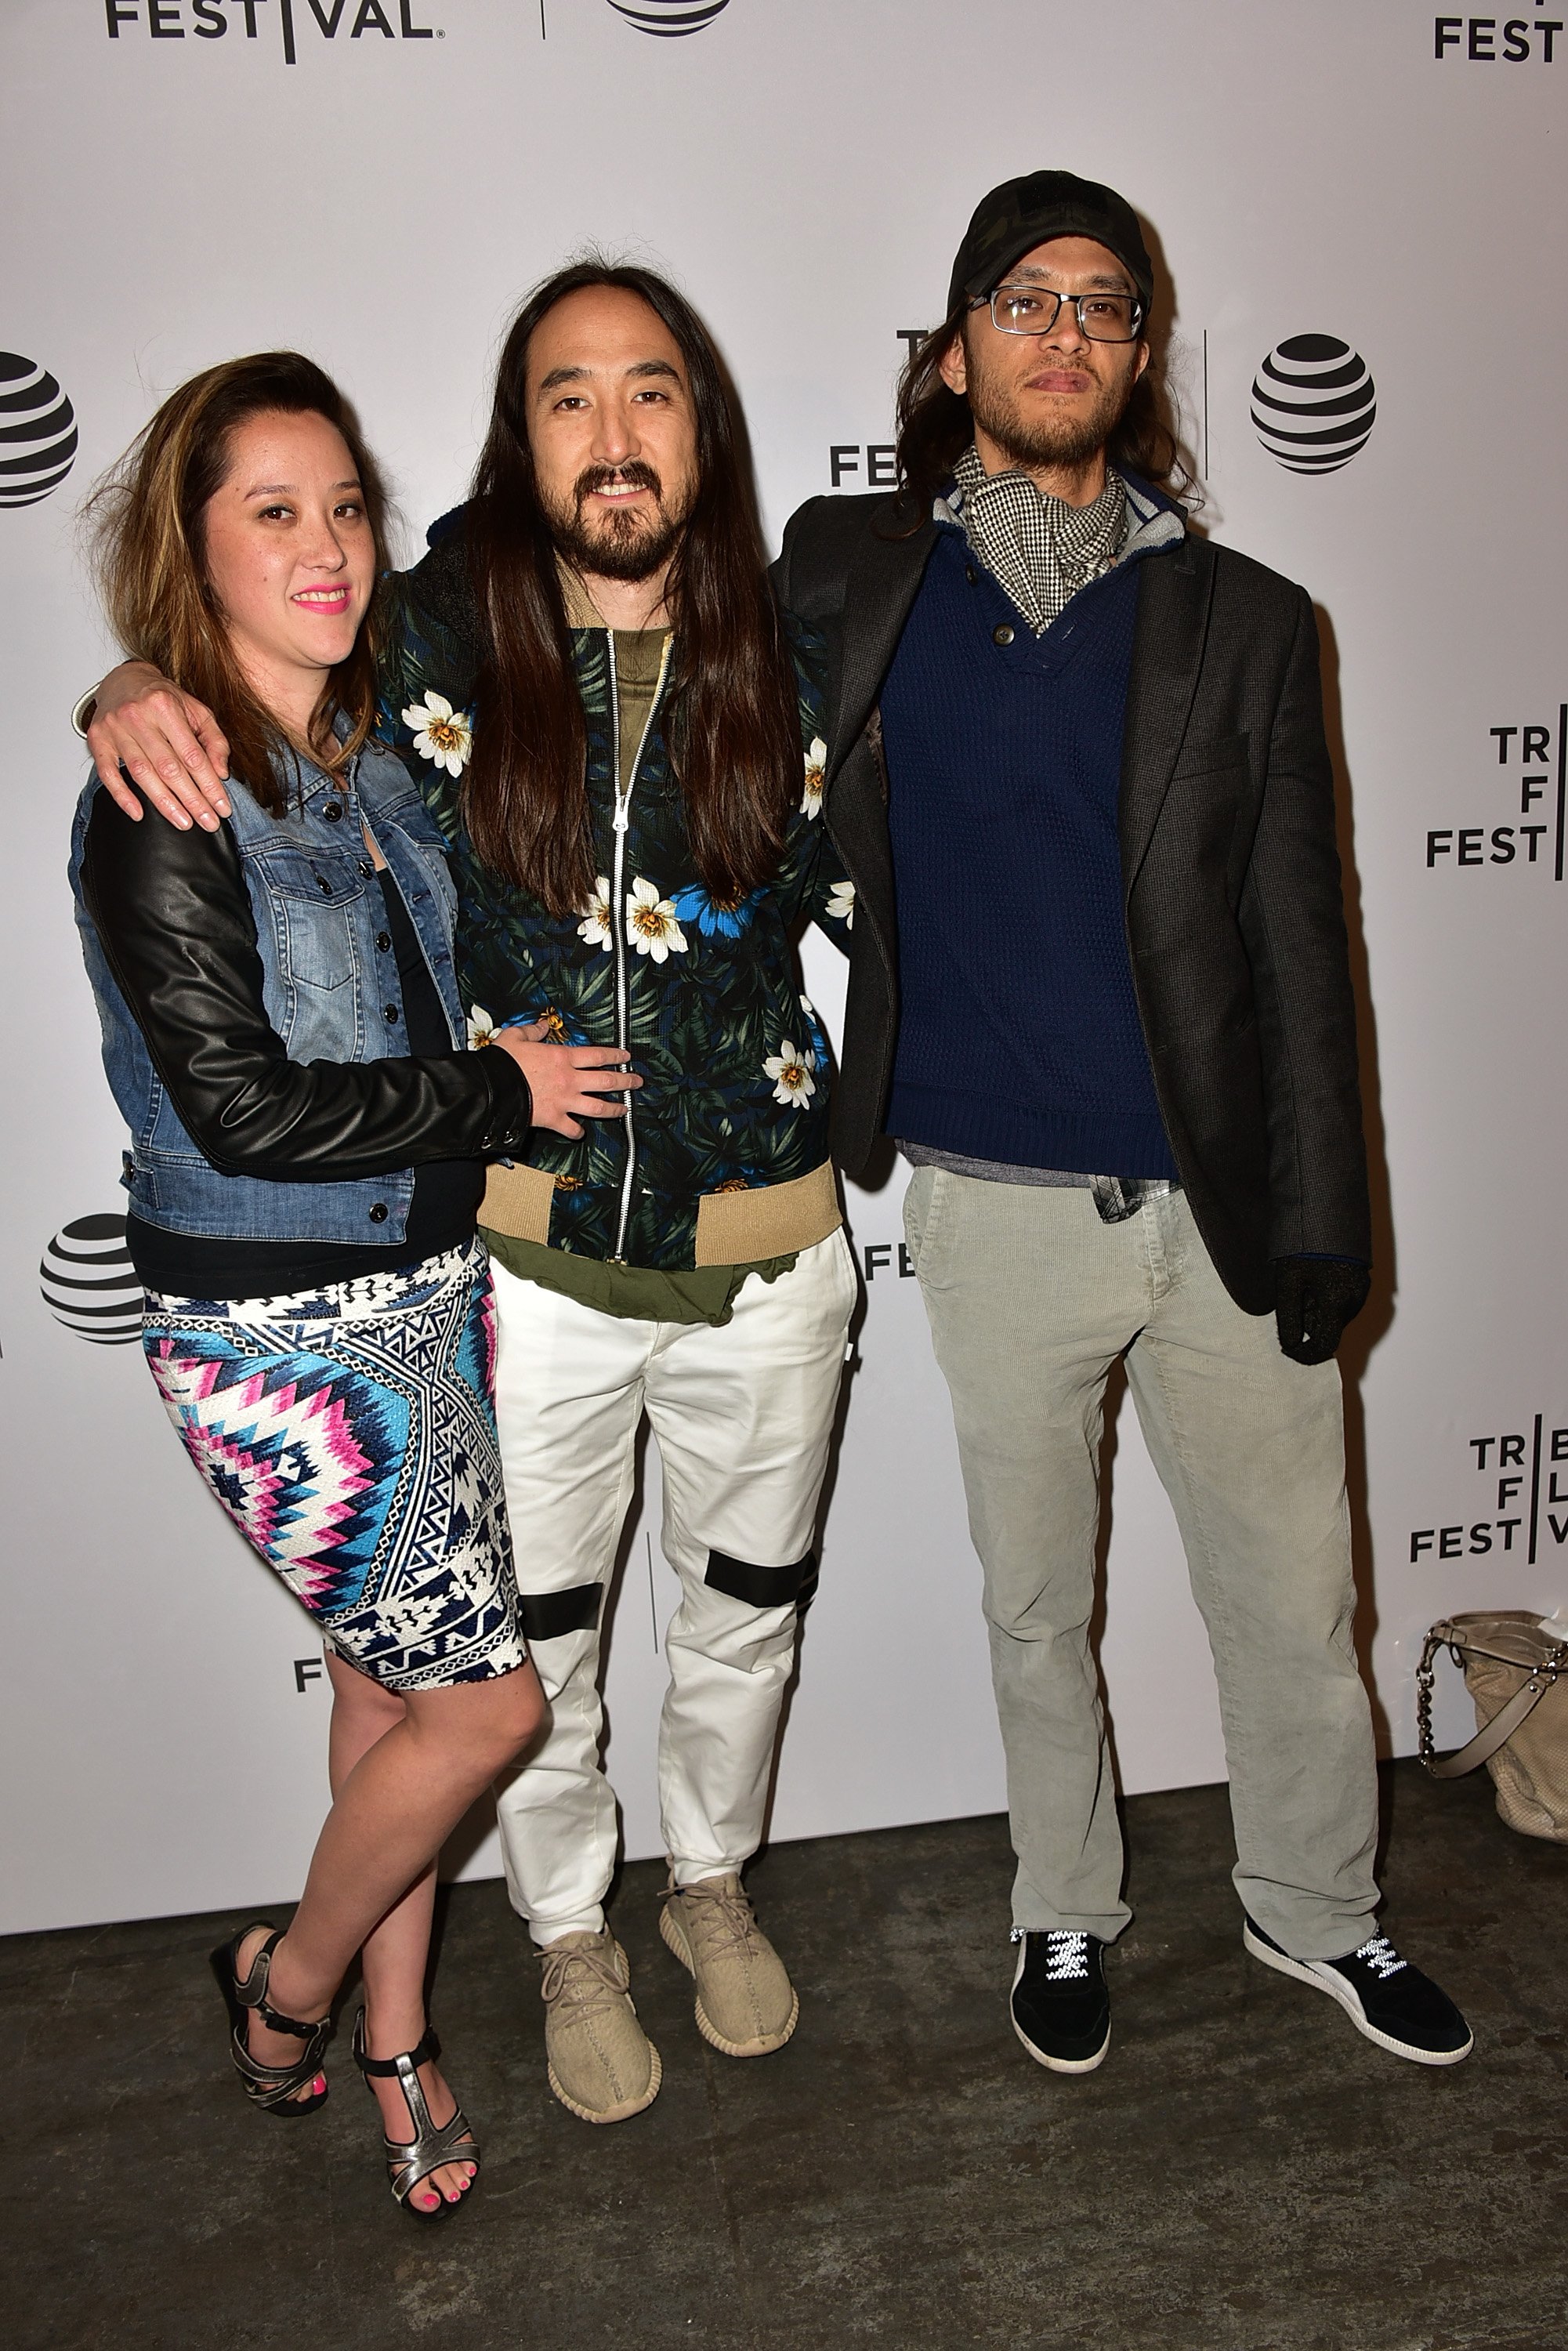 Echo Aoki, Steve Aoki, and Kyle Aoki attend the "I'll Sleep When I'm Dead" premiere during the 2016 Tribeca Film Festival at Beacon Theatre on April 15, 2016, in New York City. | Source: Getty Images